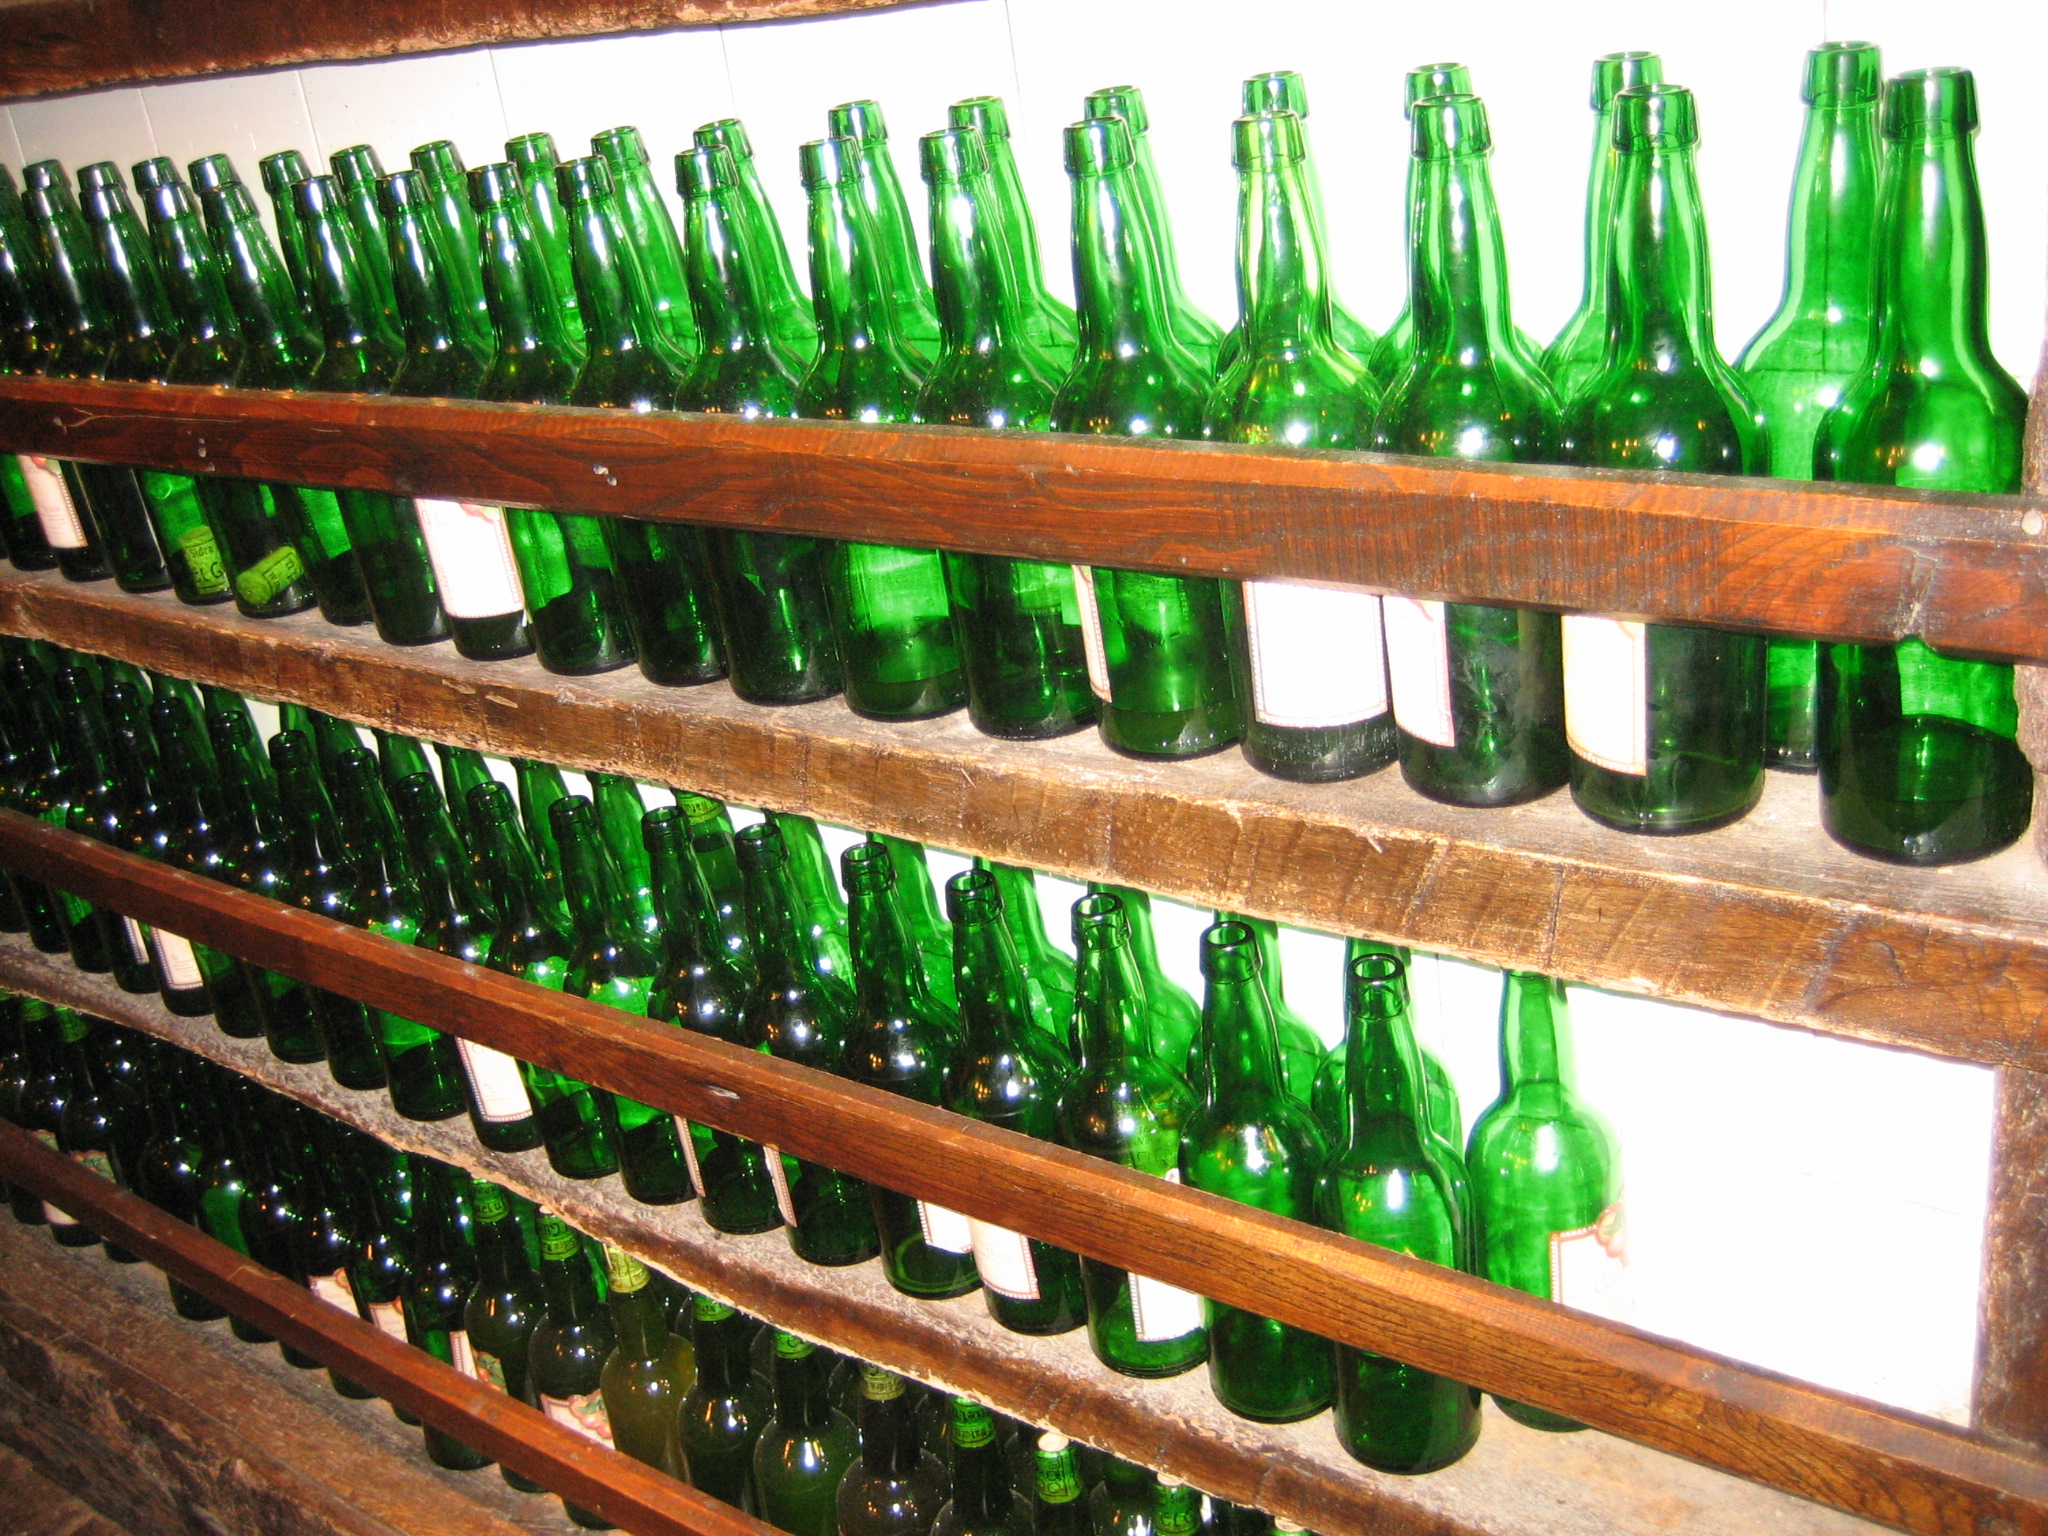 a wooden shelf with many empty green beer bottles